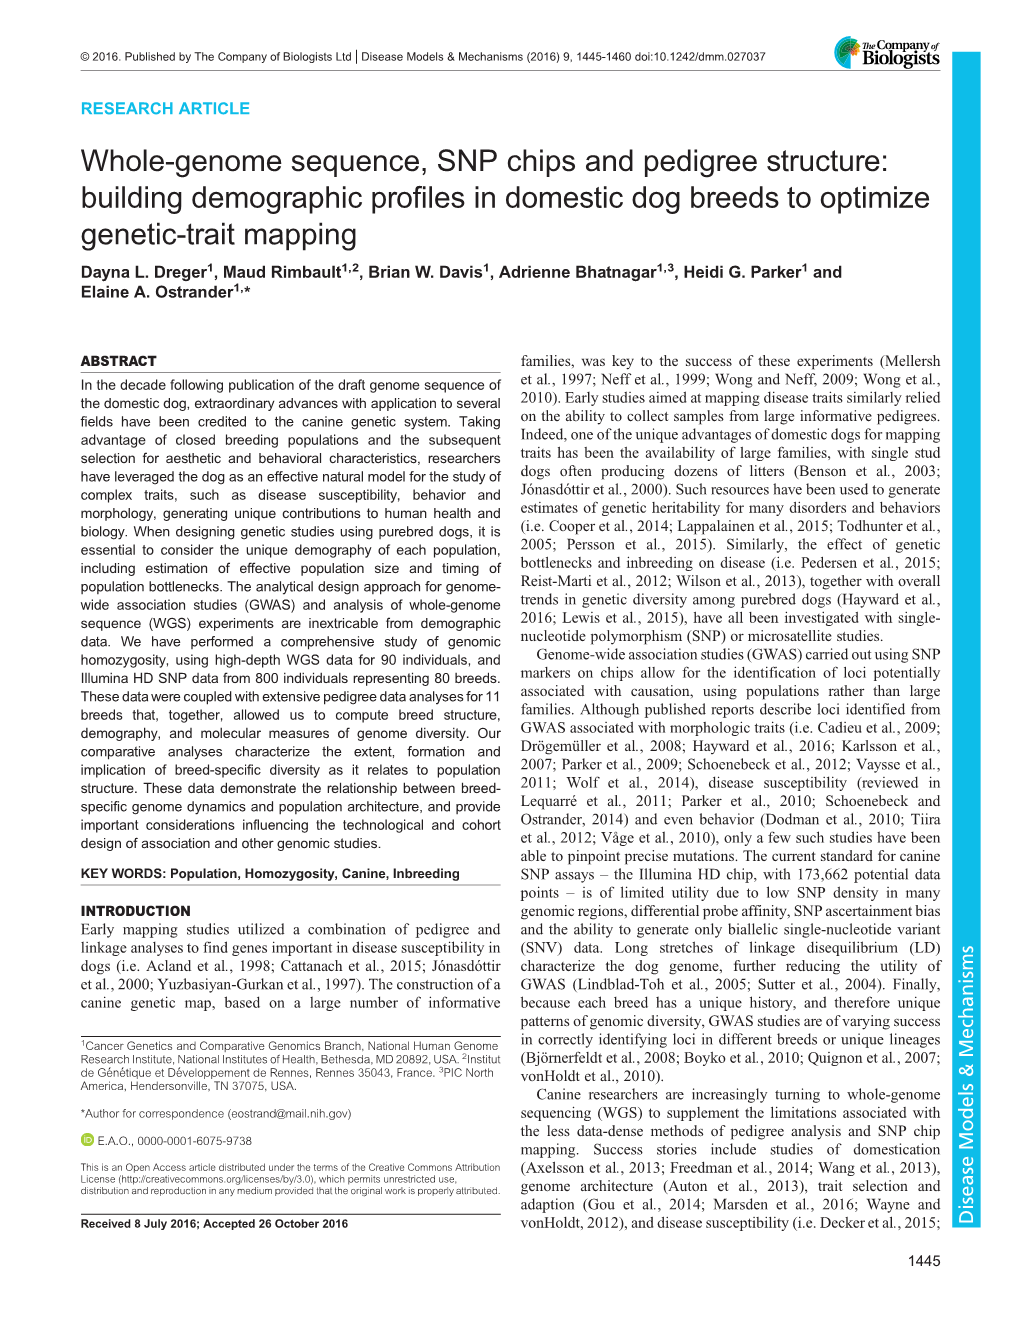 Whole-Genome Sequence, SNP Chips and Pedigree Structure: Building Demographic Profiles in Domestic Dog Breeds to Optimize Genetic-Trait Mapping Dayna L